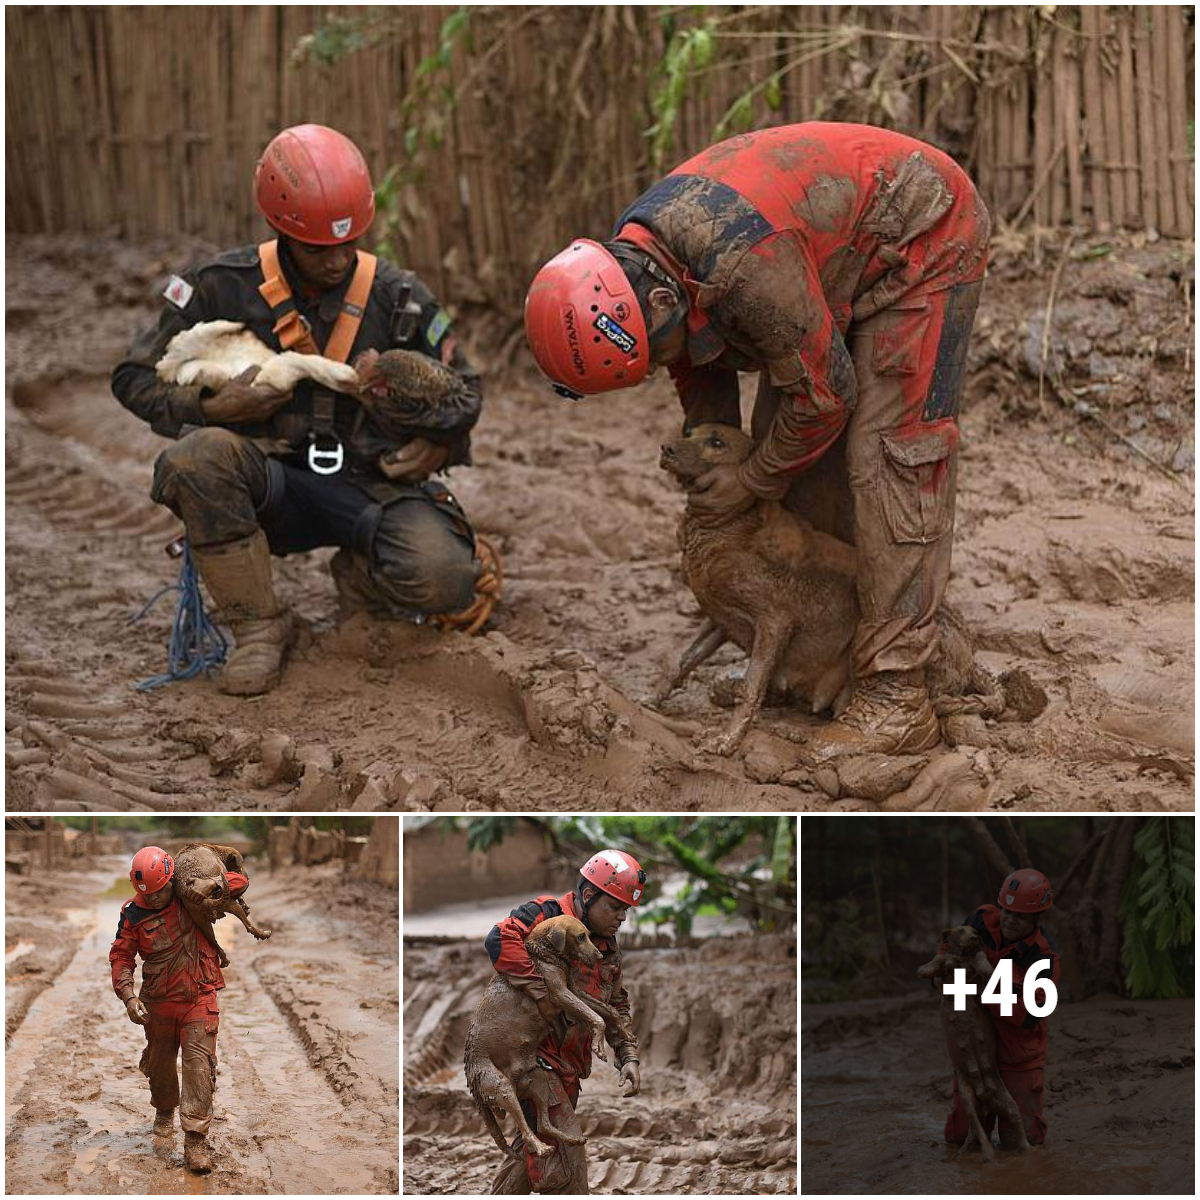 A touching story of compassion: rescuing dozens of animals trapped in quicksand after a mine disaster in Brazil